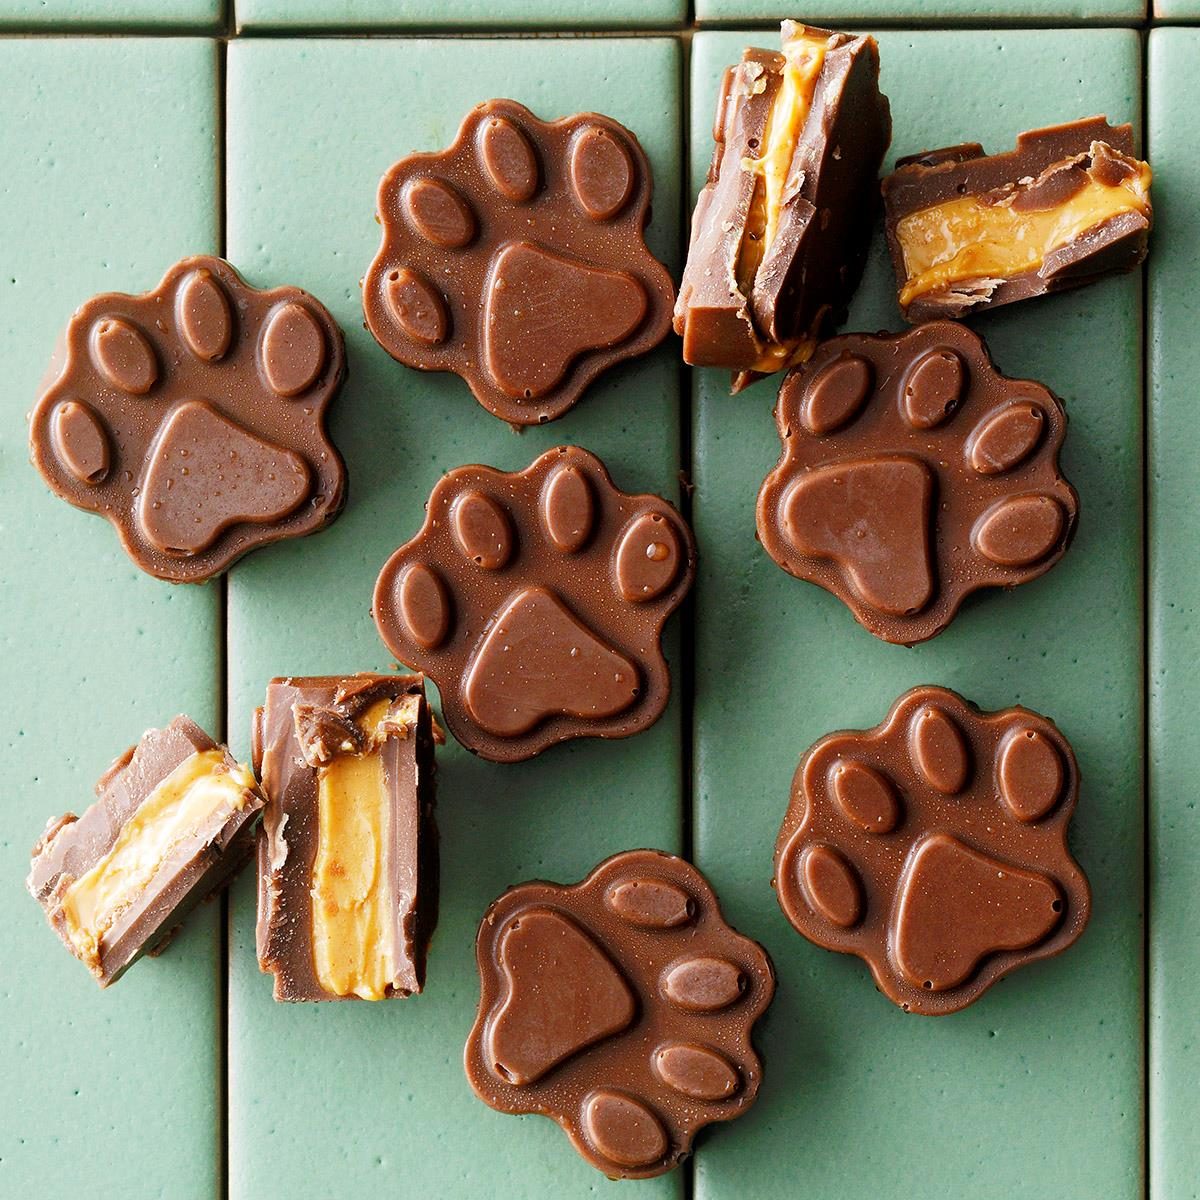 Making Homemade Dog Treats with Kids - Pooch Parenting